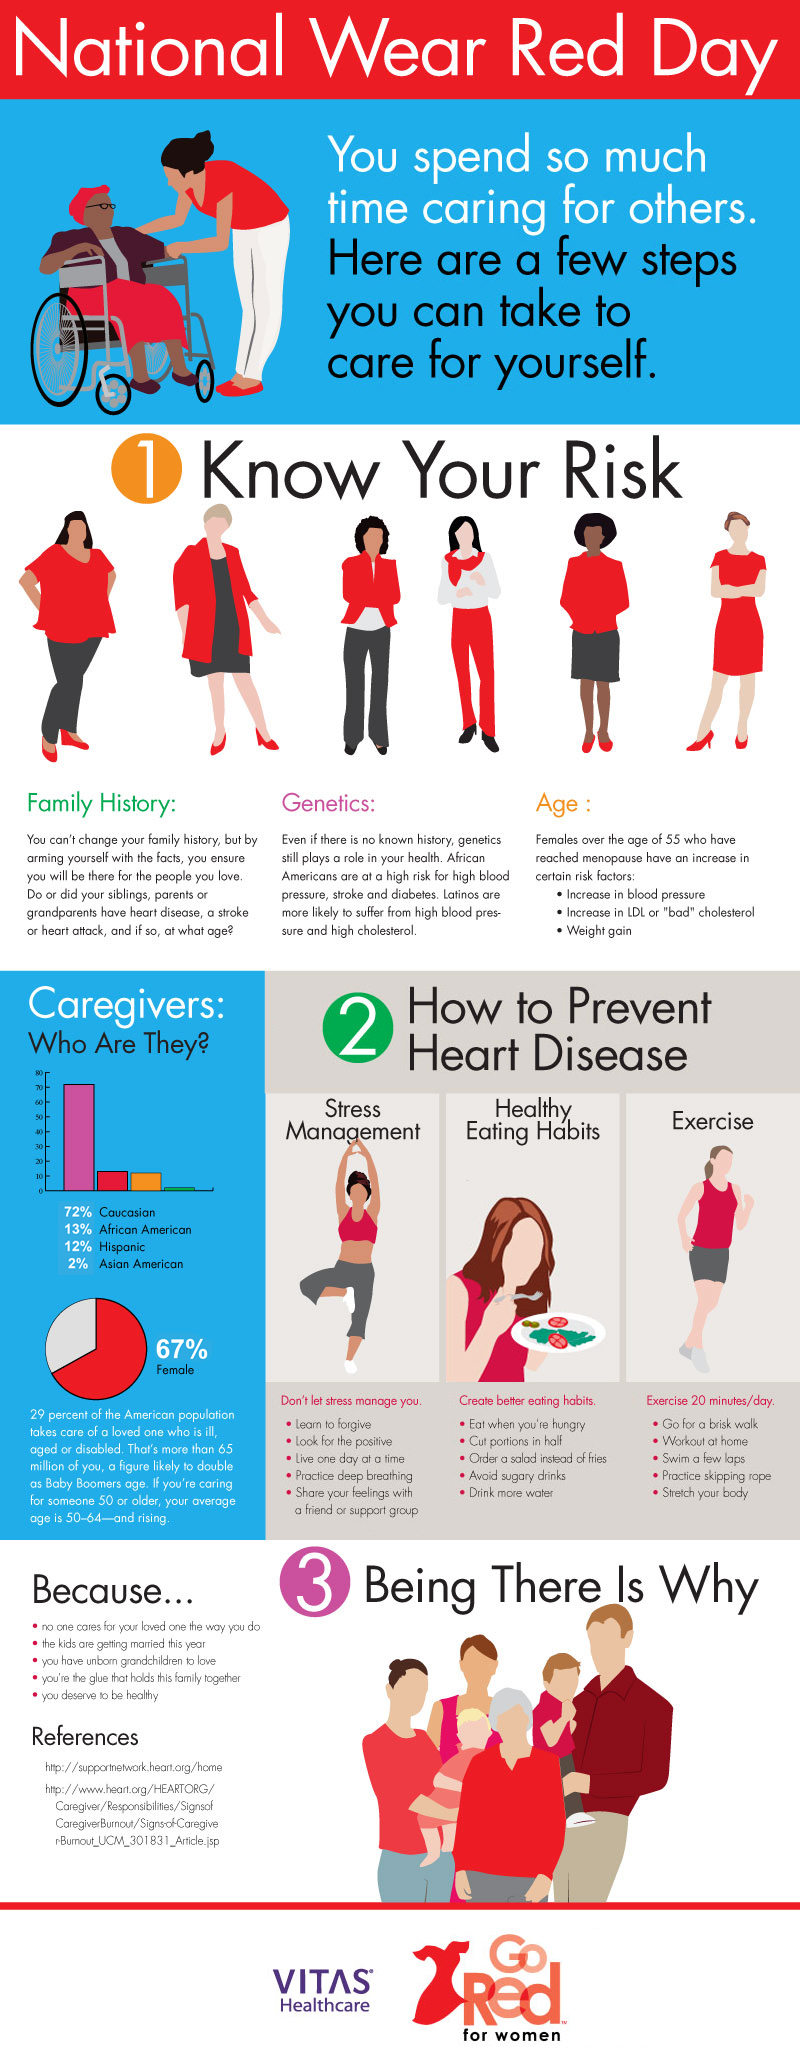 Heart Health Infographic from VITAS